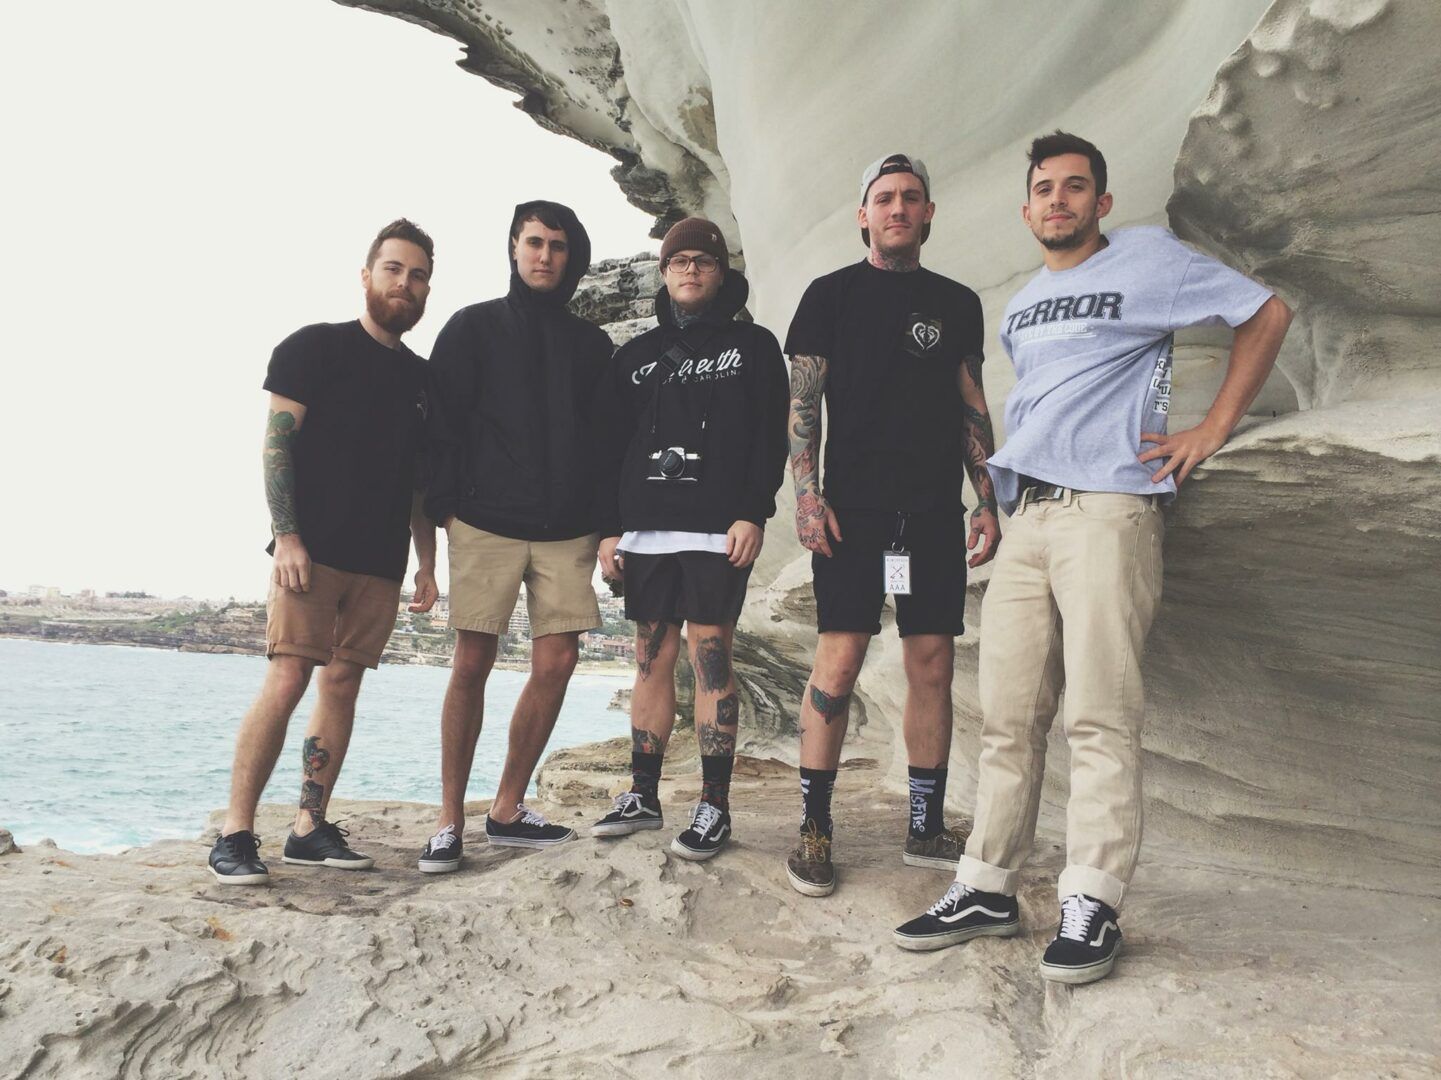 Hundredth Announce the “Common Vision Tour”